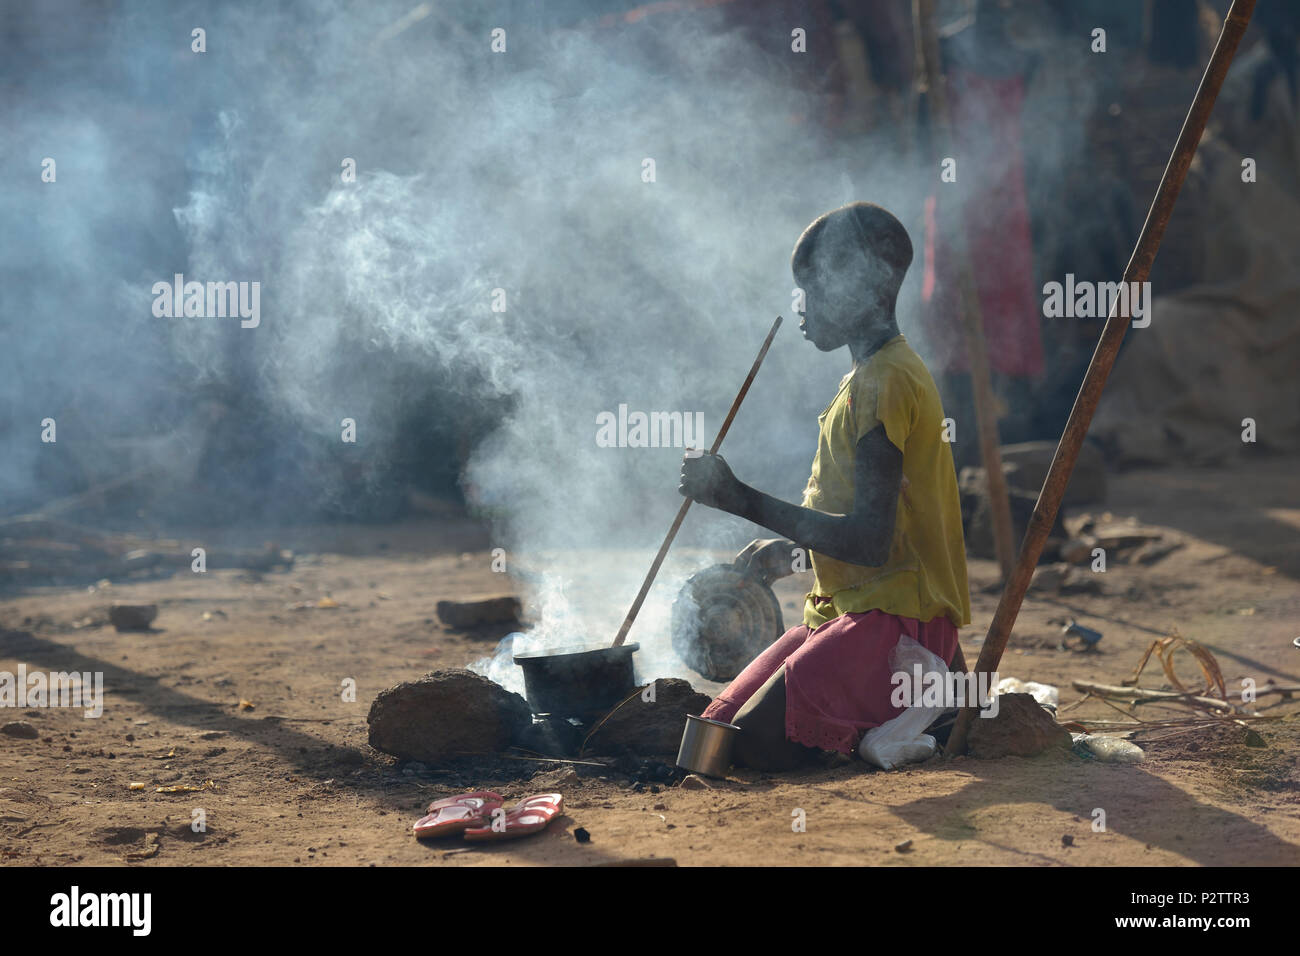 8-year old Adieu Anai cooks over a fire in a camp for more than 5,000 internally displaced persons in an Episcopal Church compound in Wau, South Sudan. Stock Photo